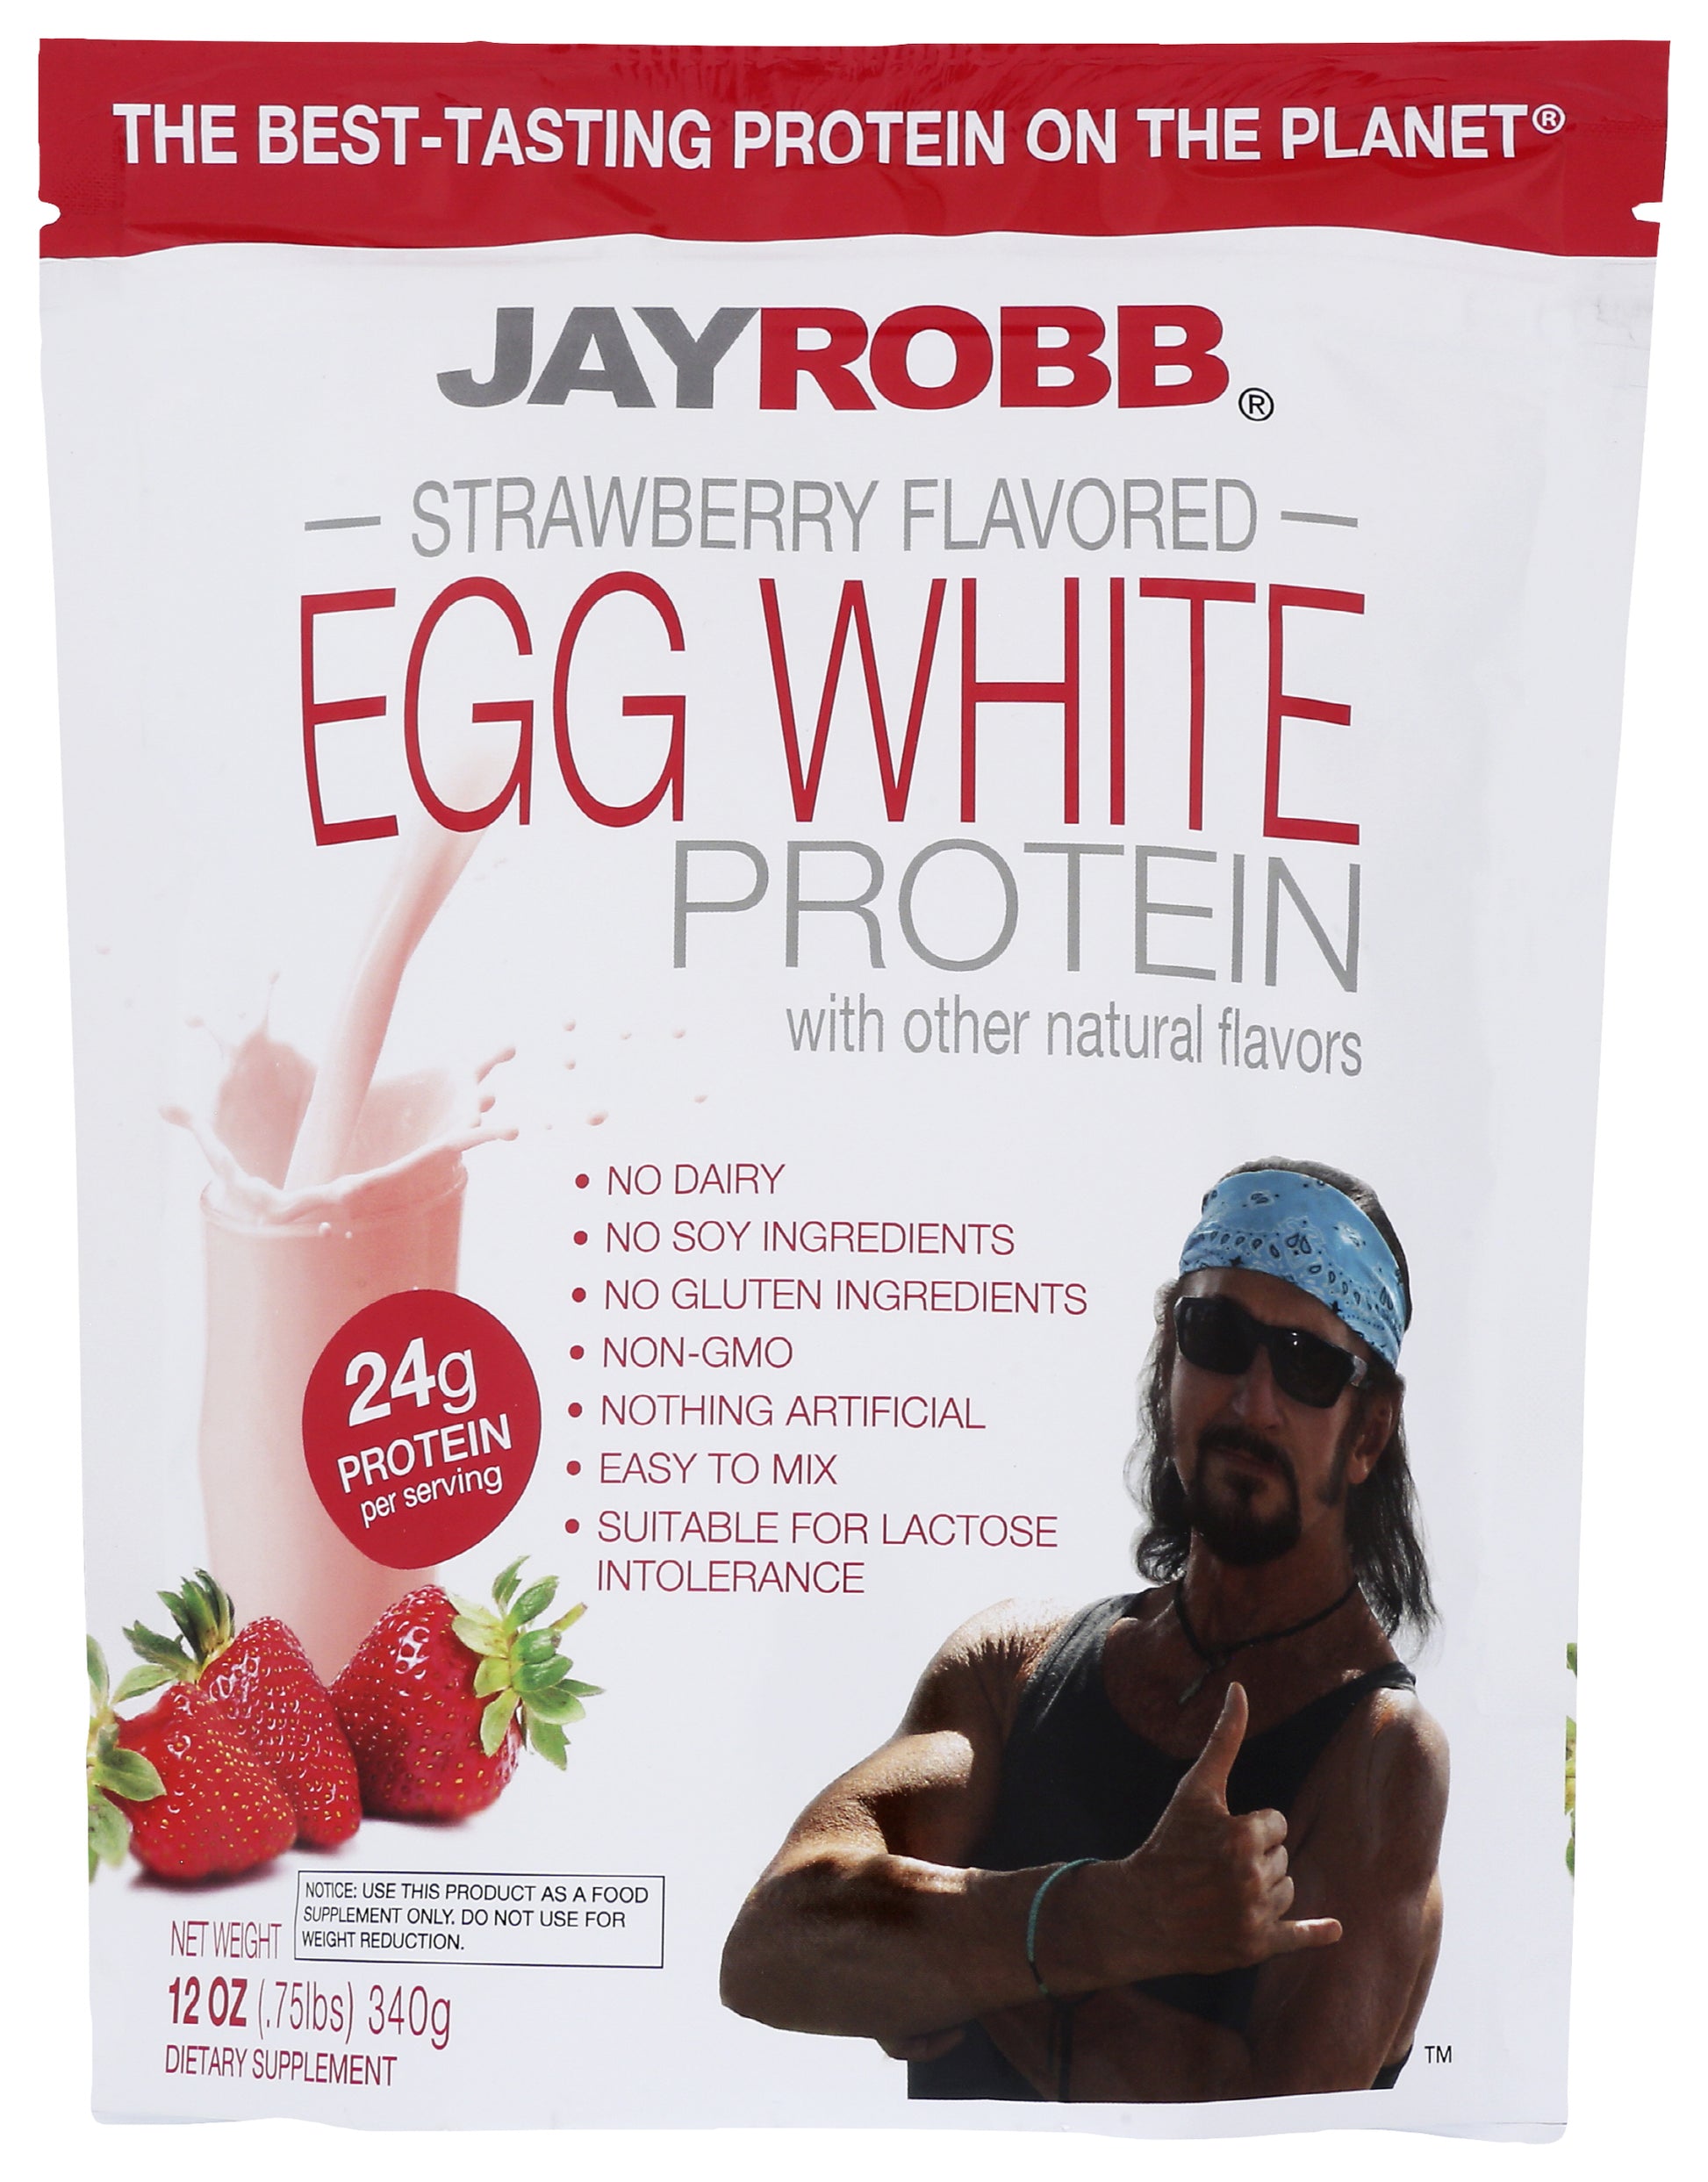 Jay Robb Strawberry Flavored Egg White Protein Powder 12oz Front of Bag